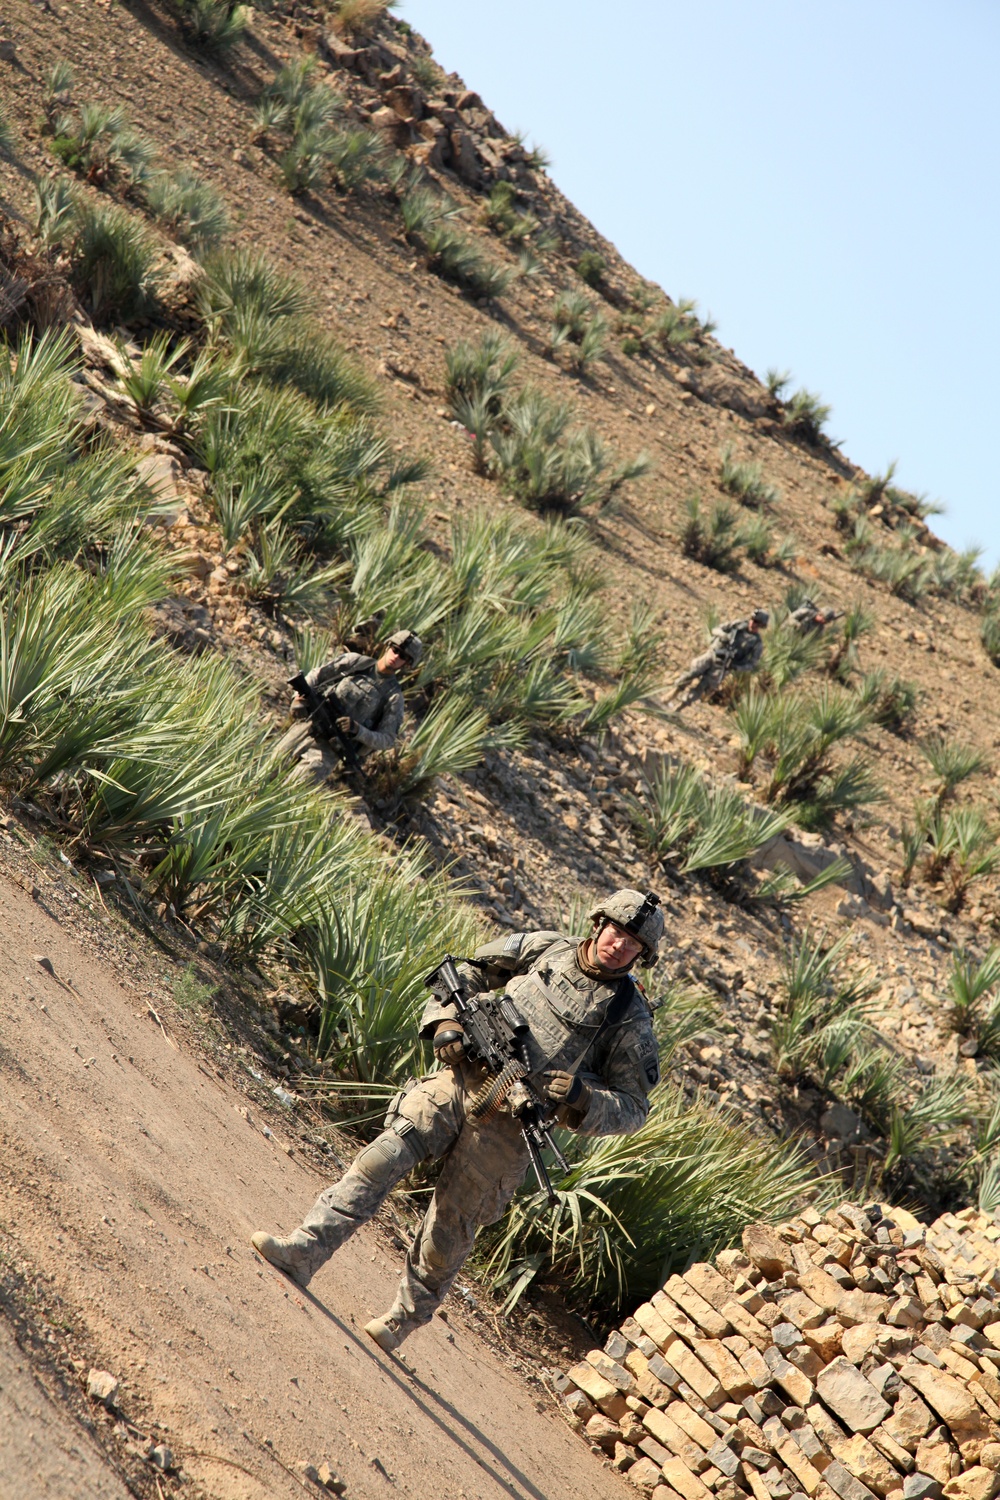 Operation Enduring Freedom, Operation Red Knight